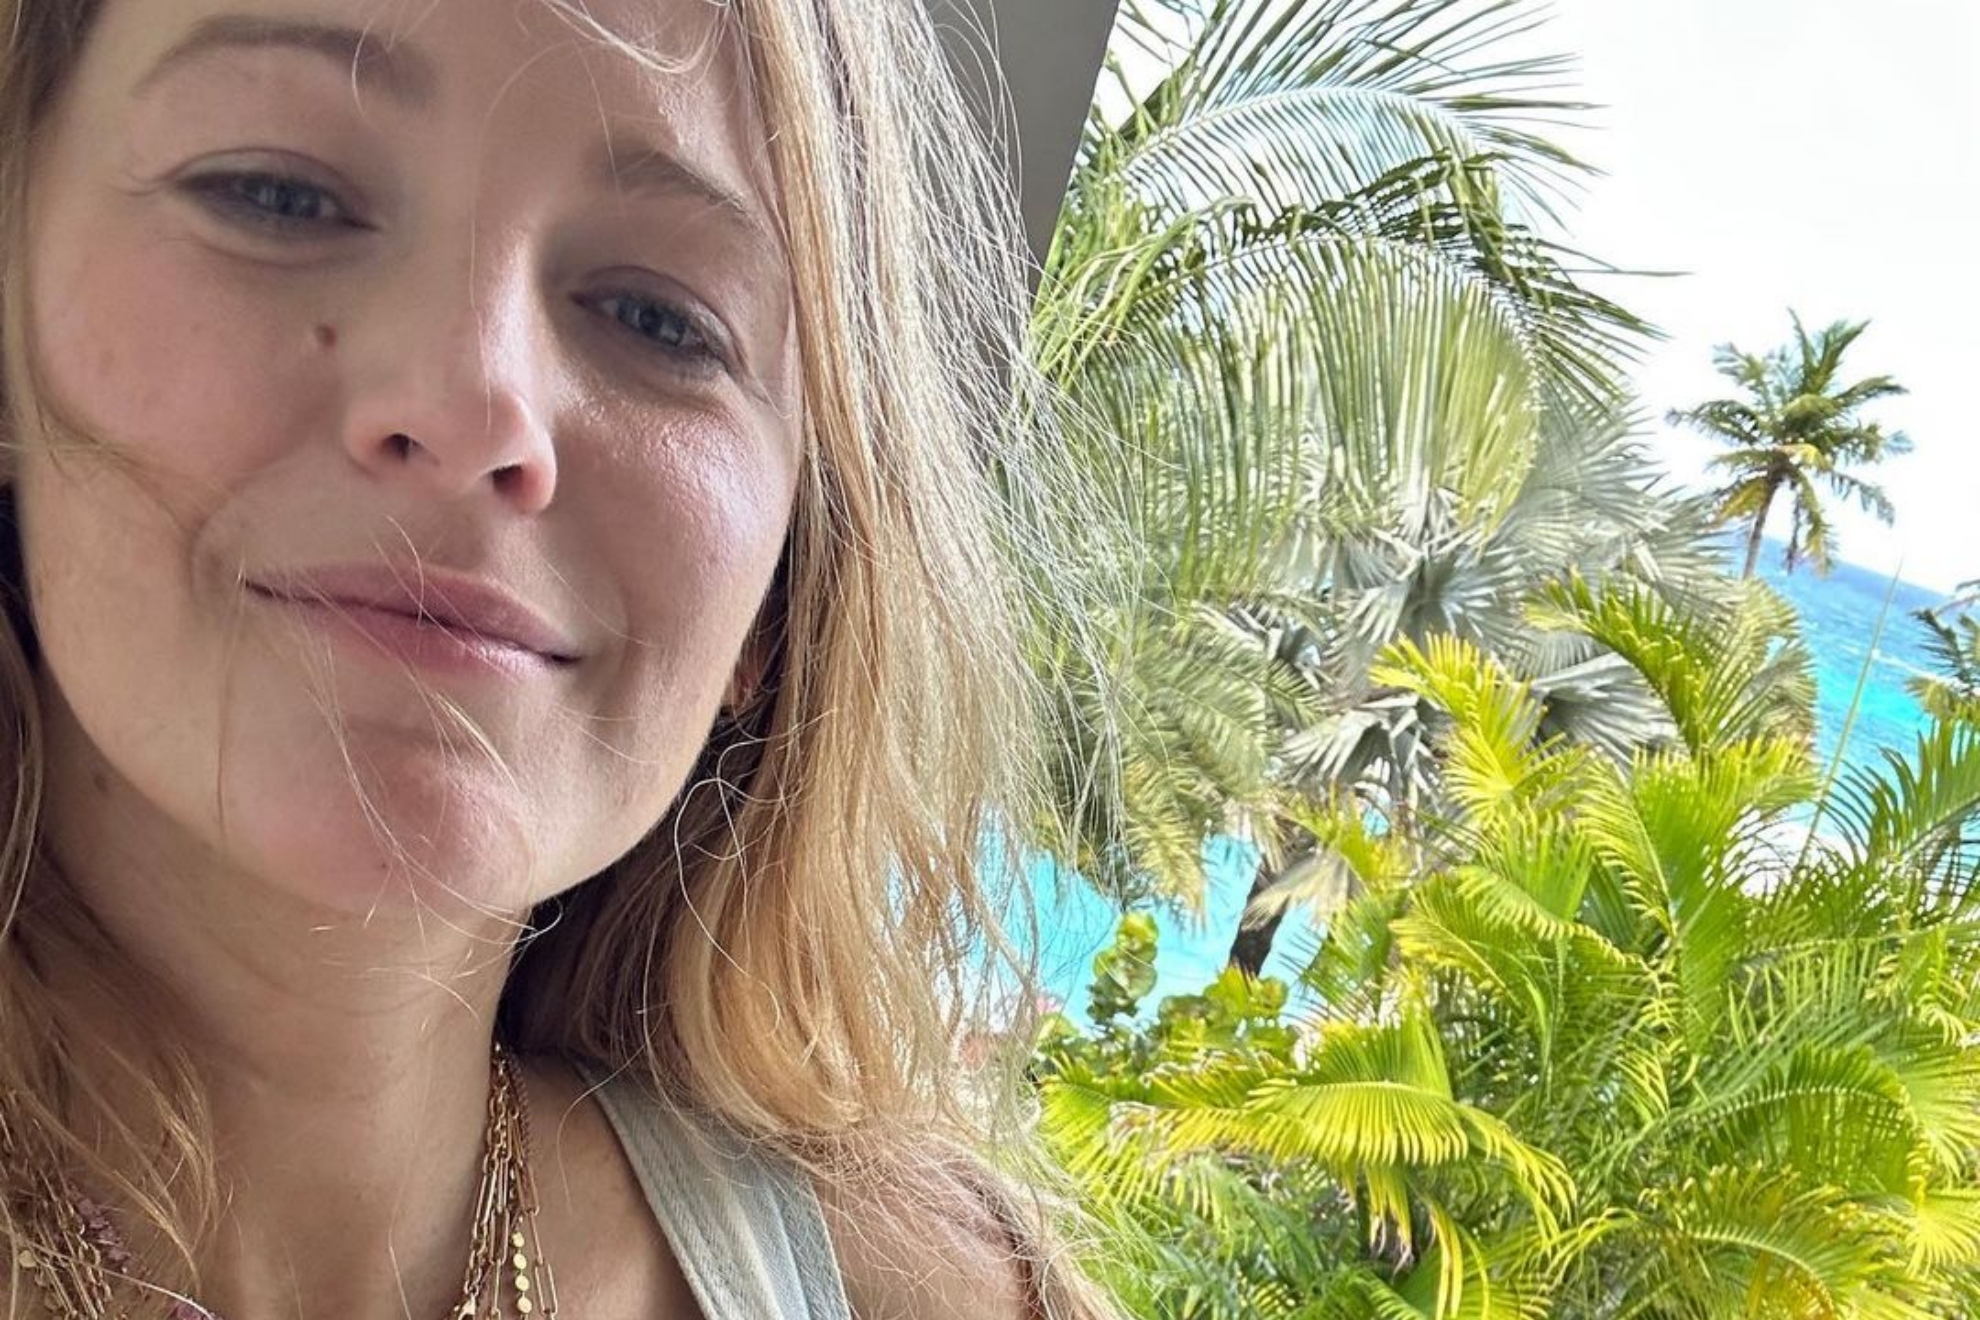 Blake Lively shows off bikini body on family vacation following birth of  4th child